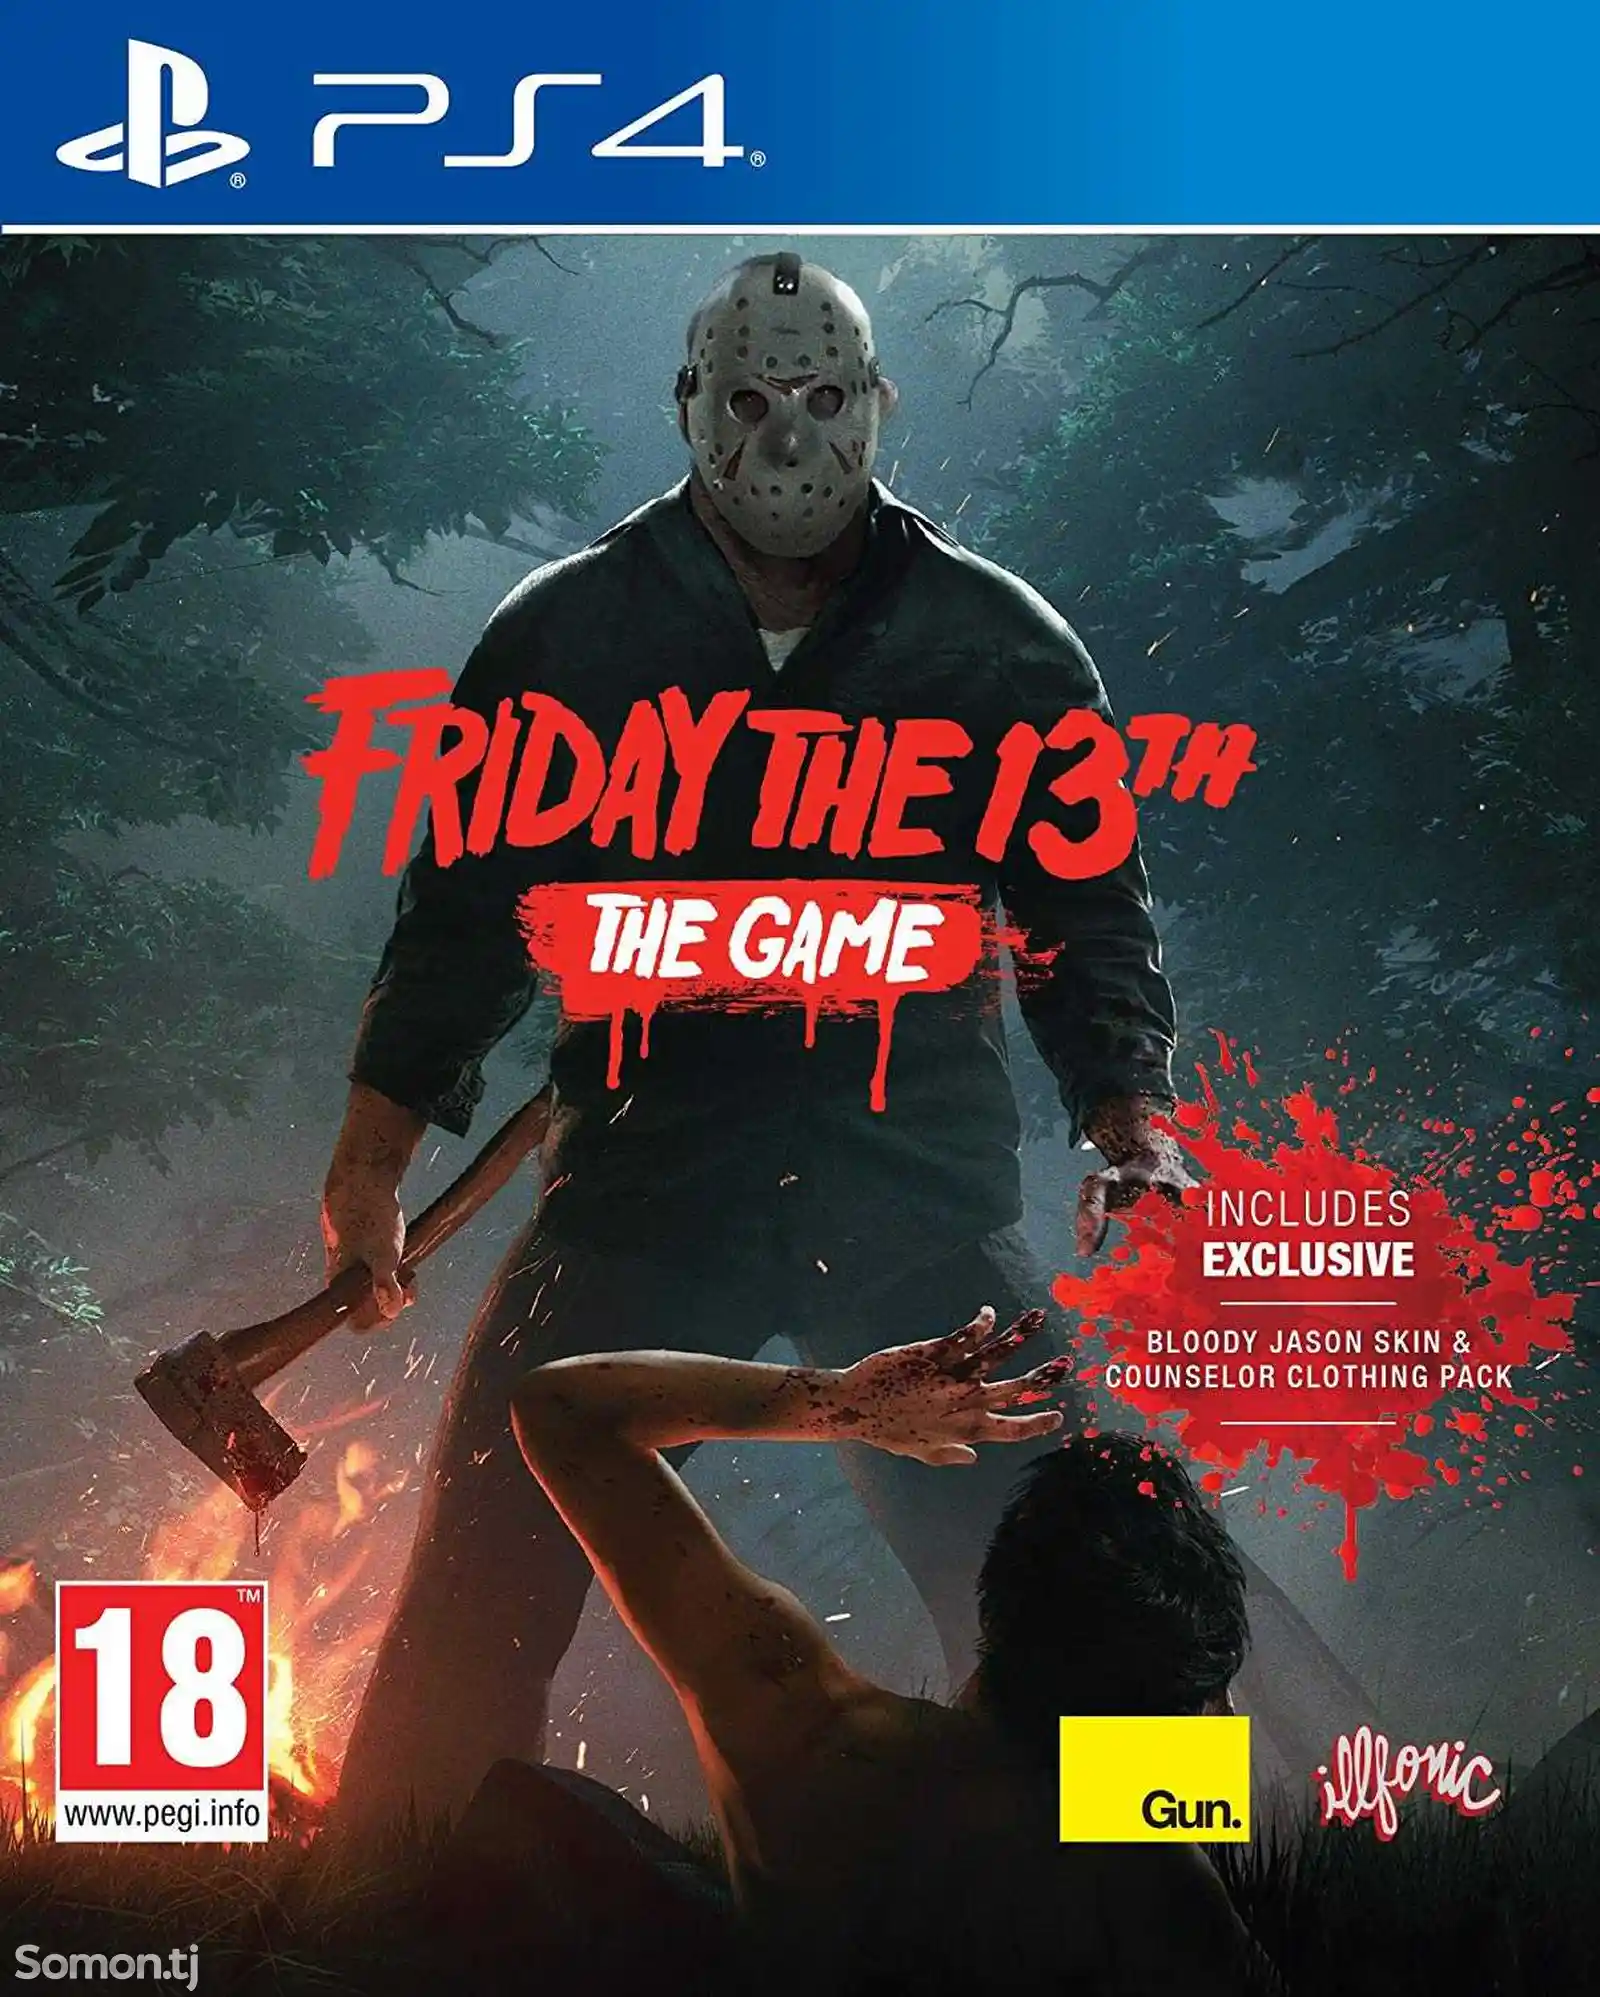 Игра Friday the 13th the game для PS-4 / 5.05 / 6.72 / 7.02 / 7.55 / 9.00 /-1